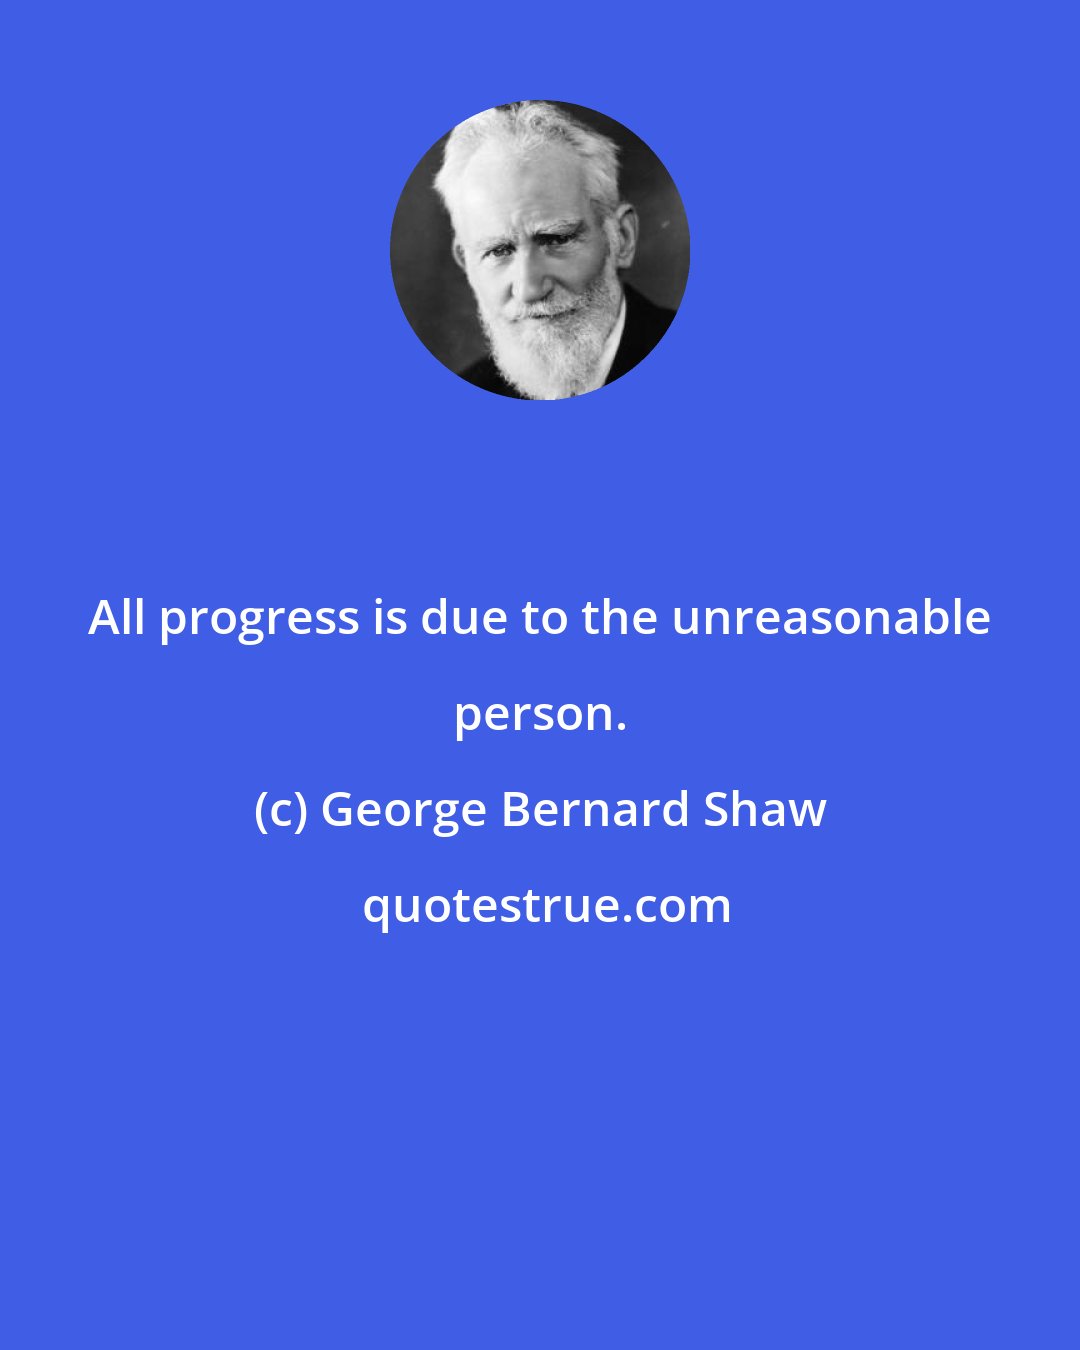 George Bernard Shaw: All progress is due to the unreasonable person.